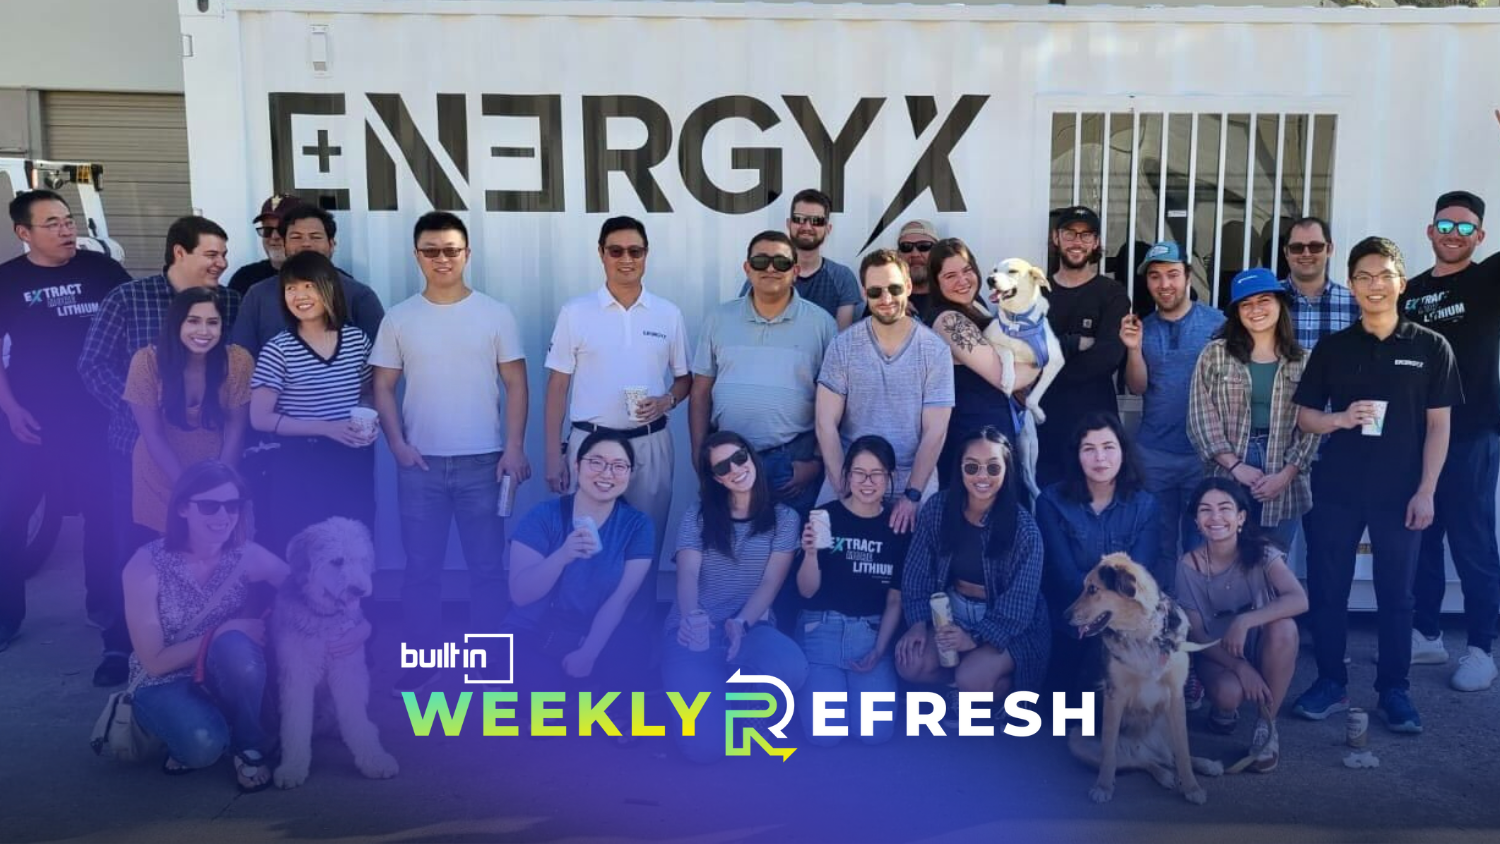 The EnergyX team with the Built In Weekly Refresh banner in the foreground.